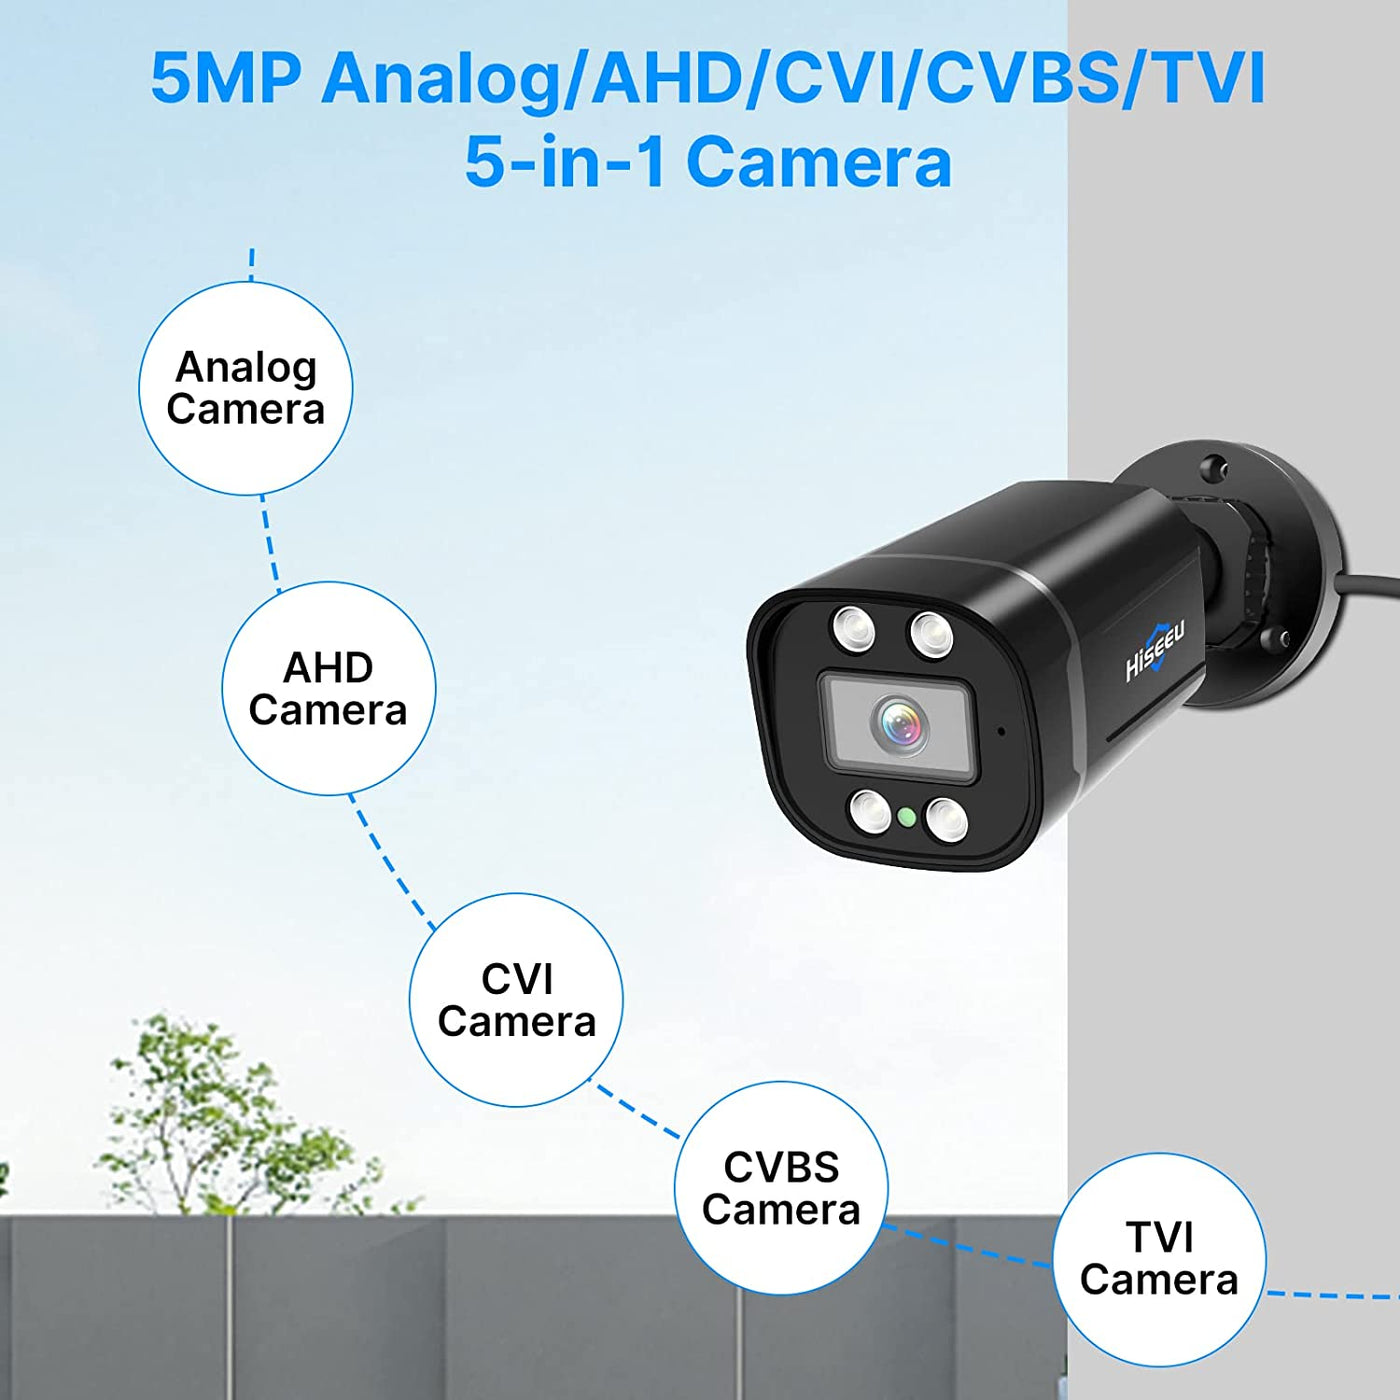 HD 5MP Analog/AHD/CVI/XVI 2560 TVL Wired Security Camera Outdoor for 5MP Analog Surveillance Dvr Kits, IP 66 Waterproof, Clear Night Vision up to 60ft, Remote Access